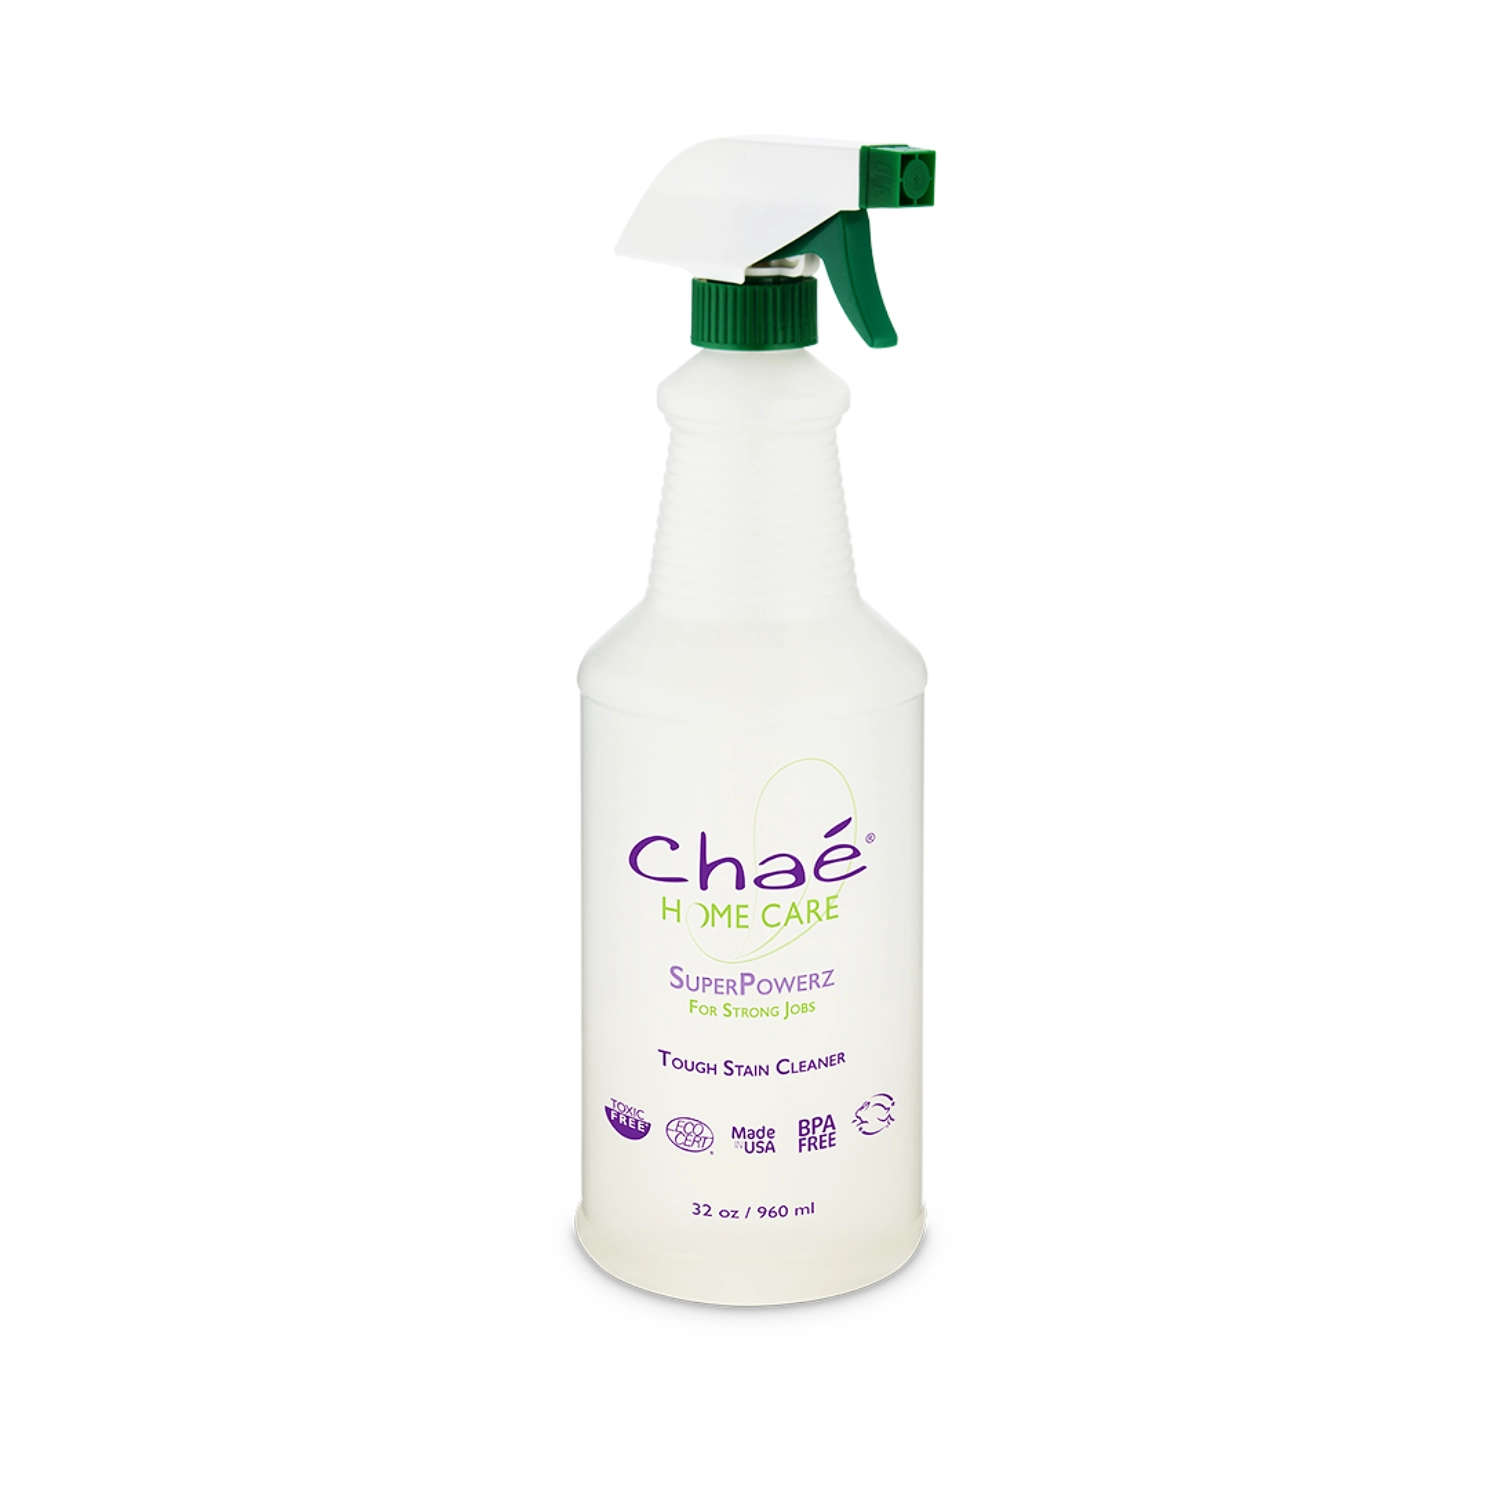 SuperPowerz - Tough Stain Cleaner